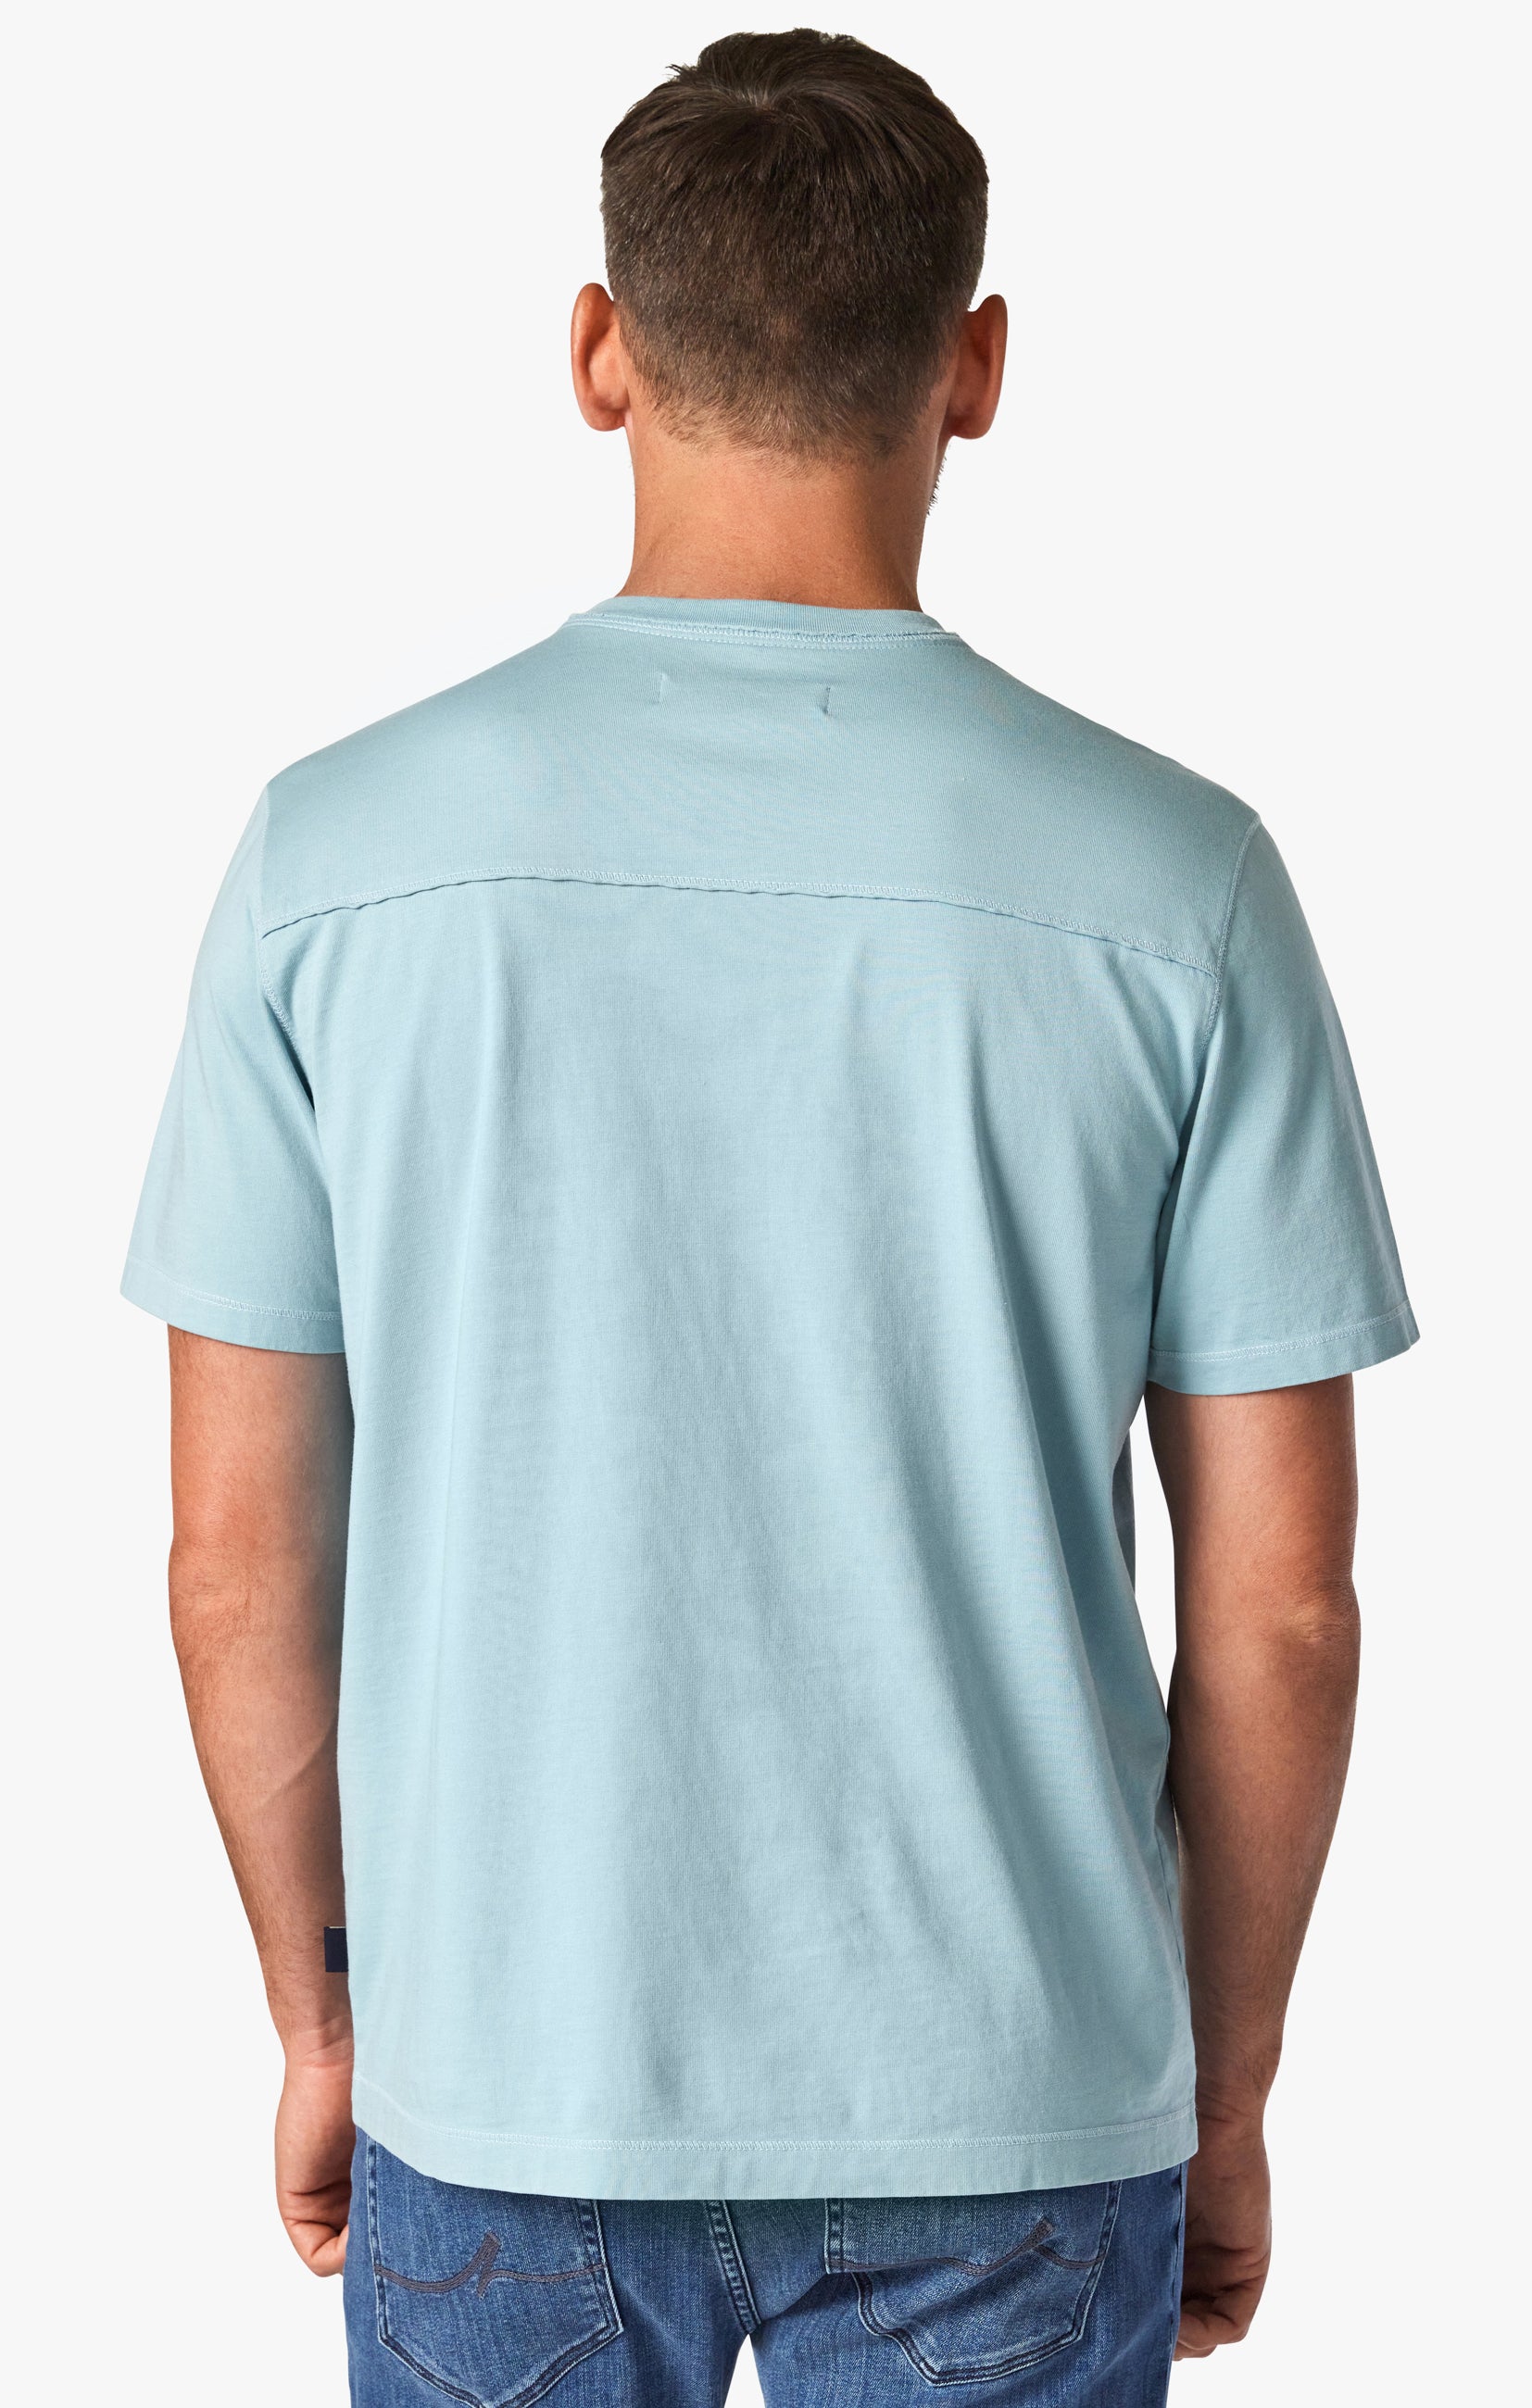 Deconstructed V-Neck T-Shirt in Forget-Me-Not Image 5